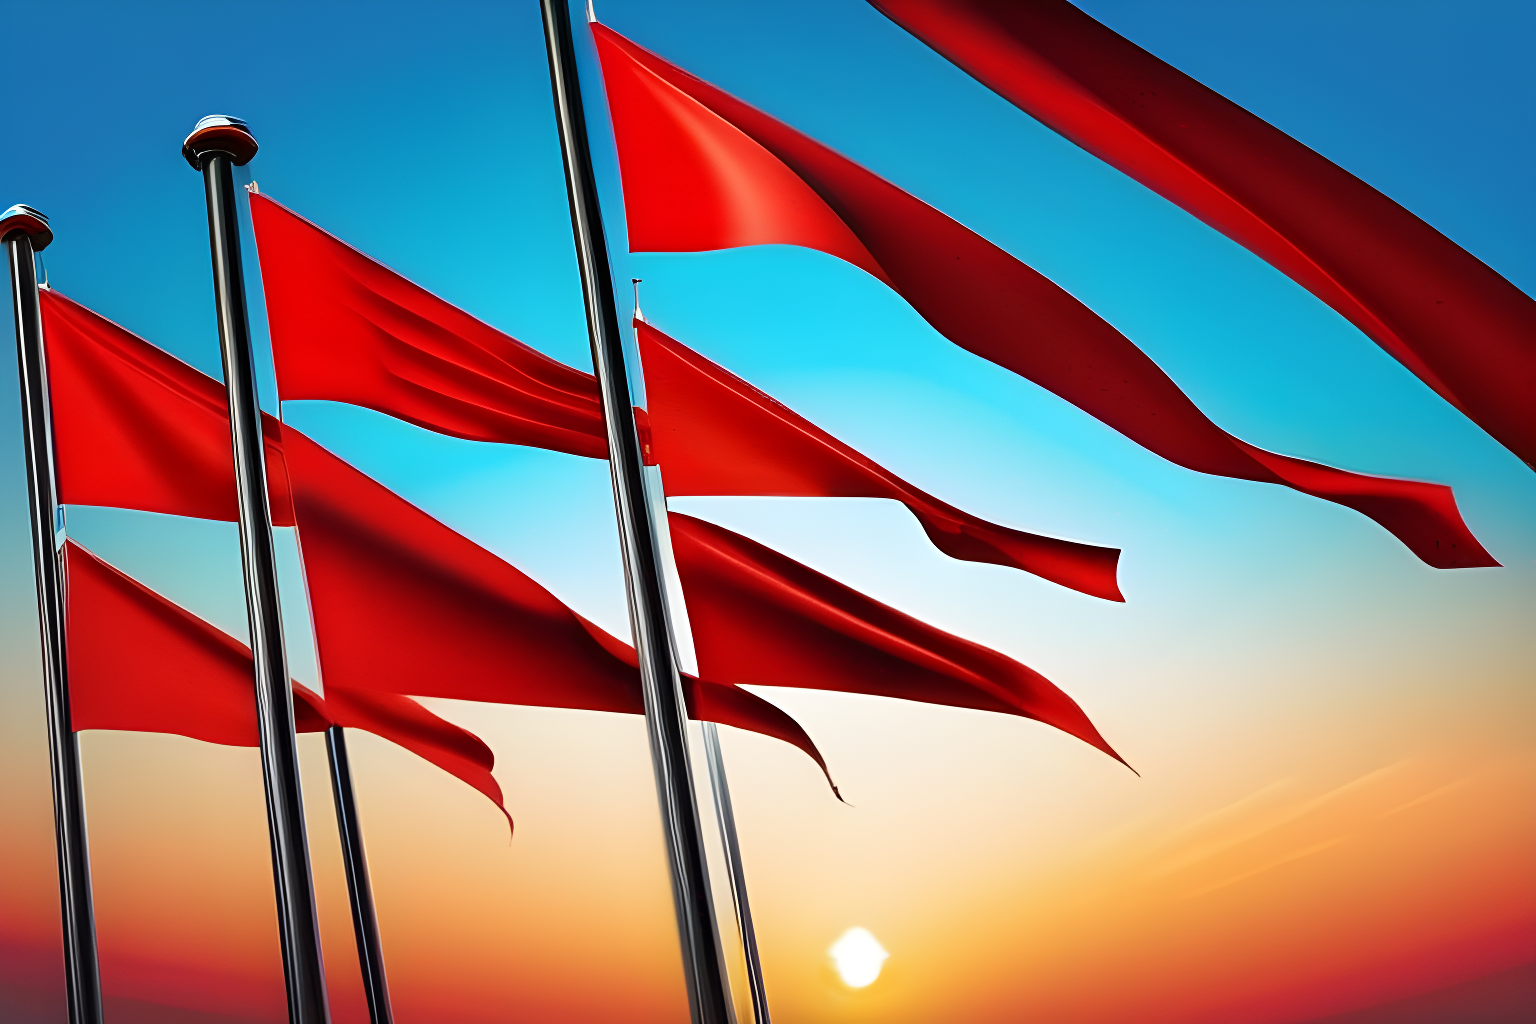 Generate a visually compelling image illustrating three prominent red flags. Each flag should be distinct and clearly convey a sense of warning or caution.